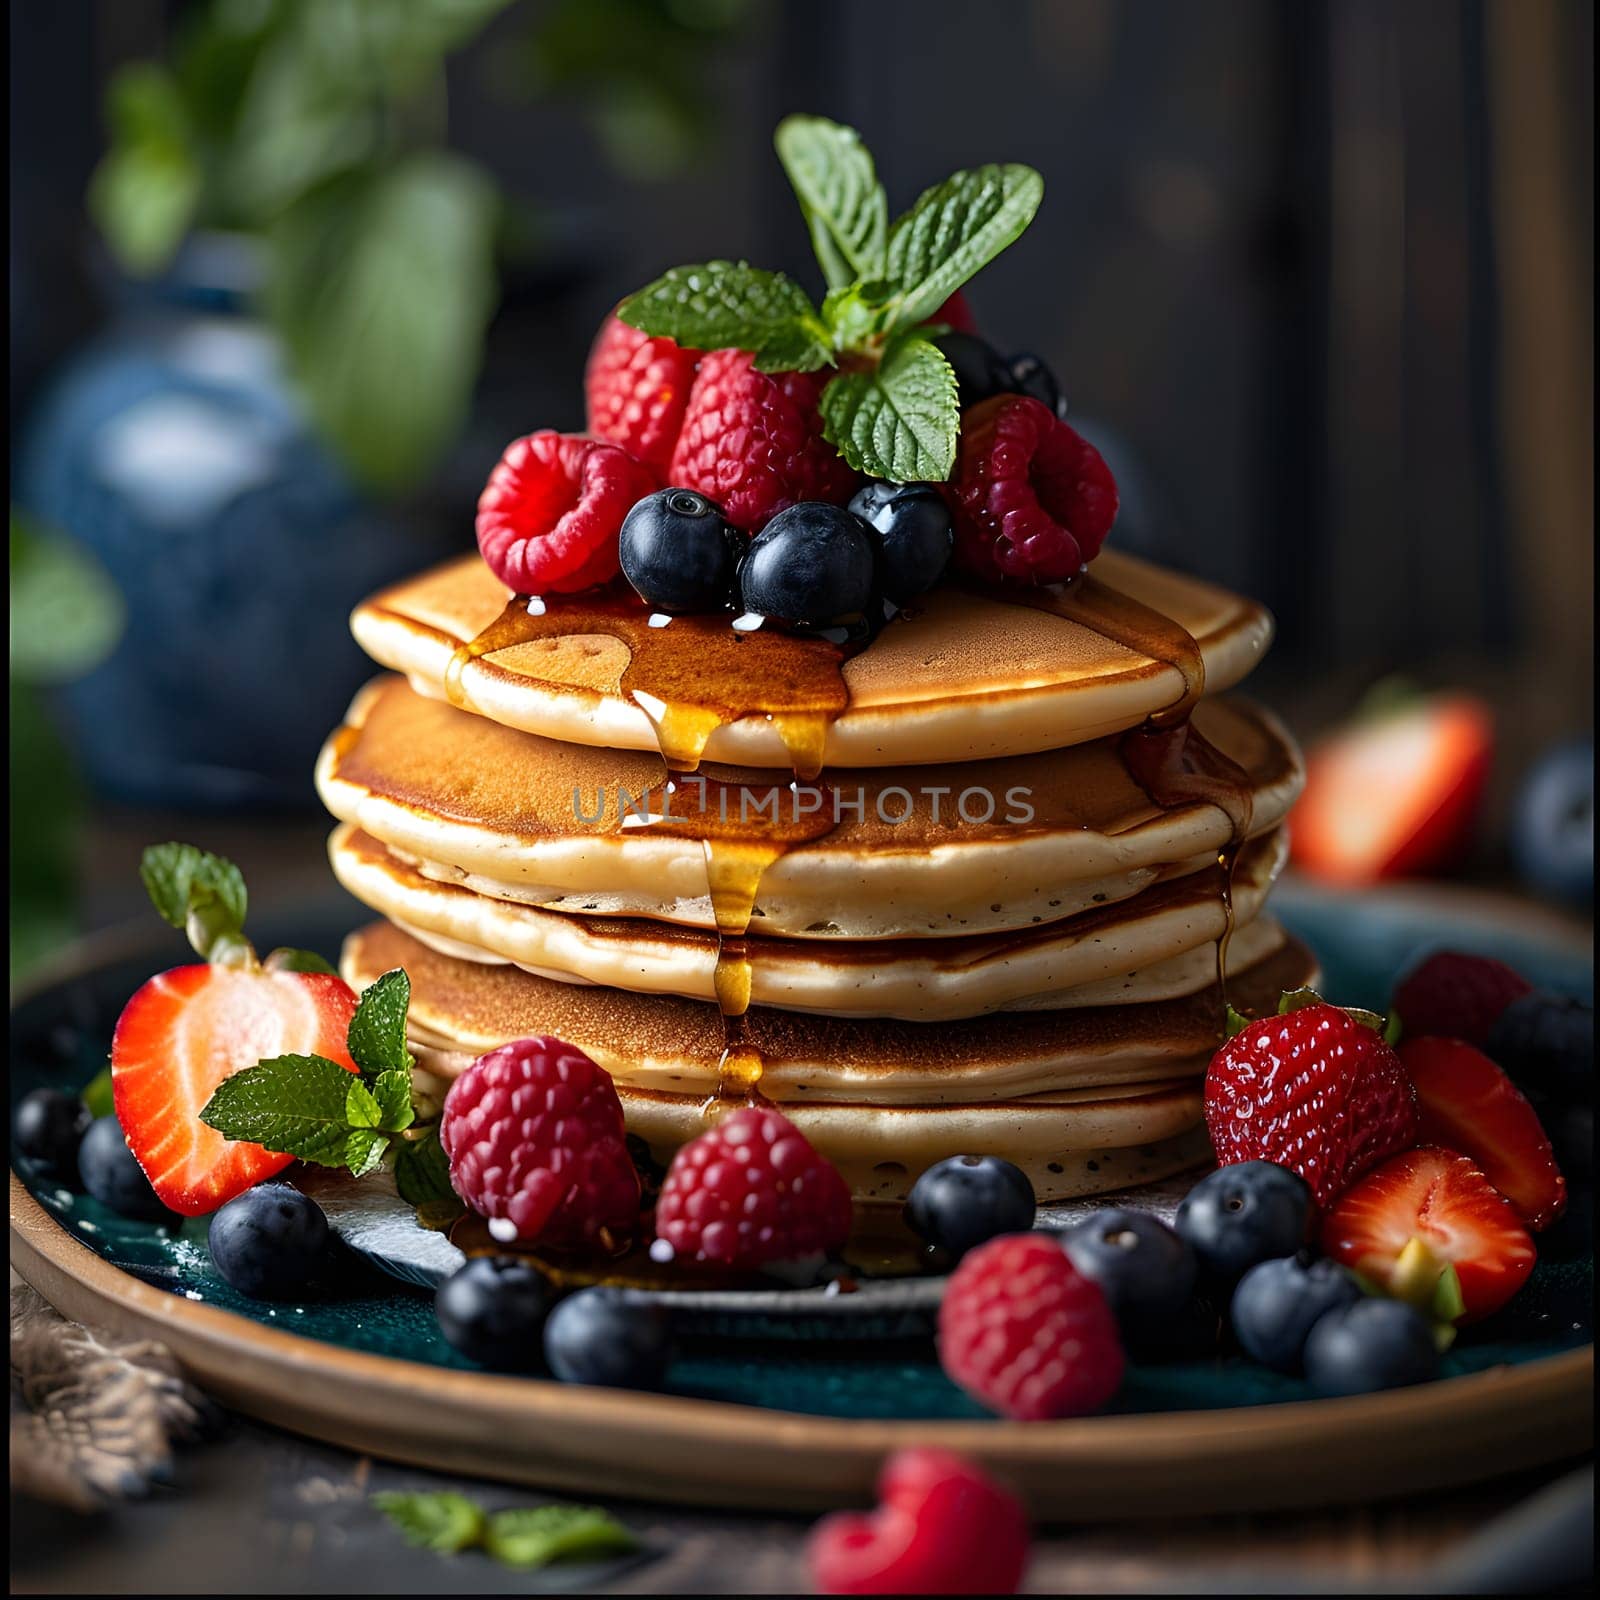 A delicious stack of pancakes topped with fresh berries and syrup, a perfect combination of food and natural ingredients for a tasty breakfast or brunch